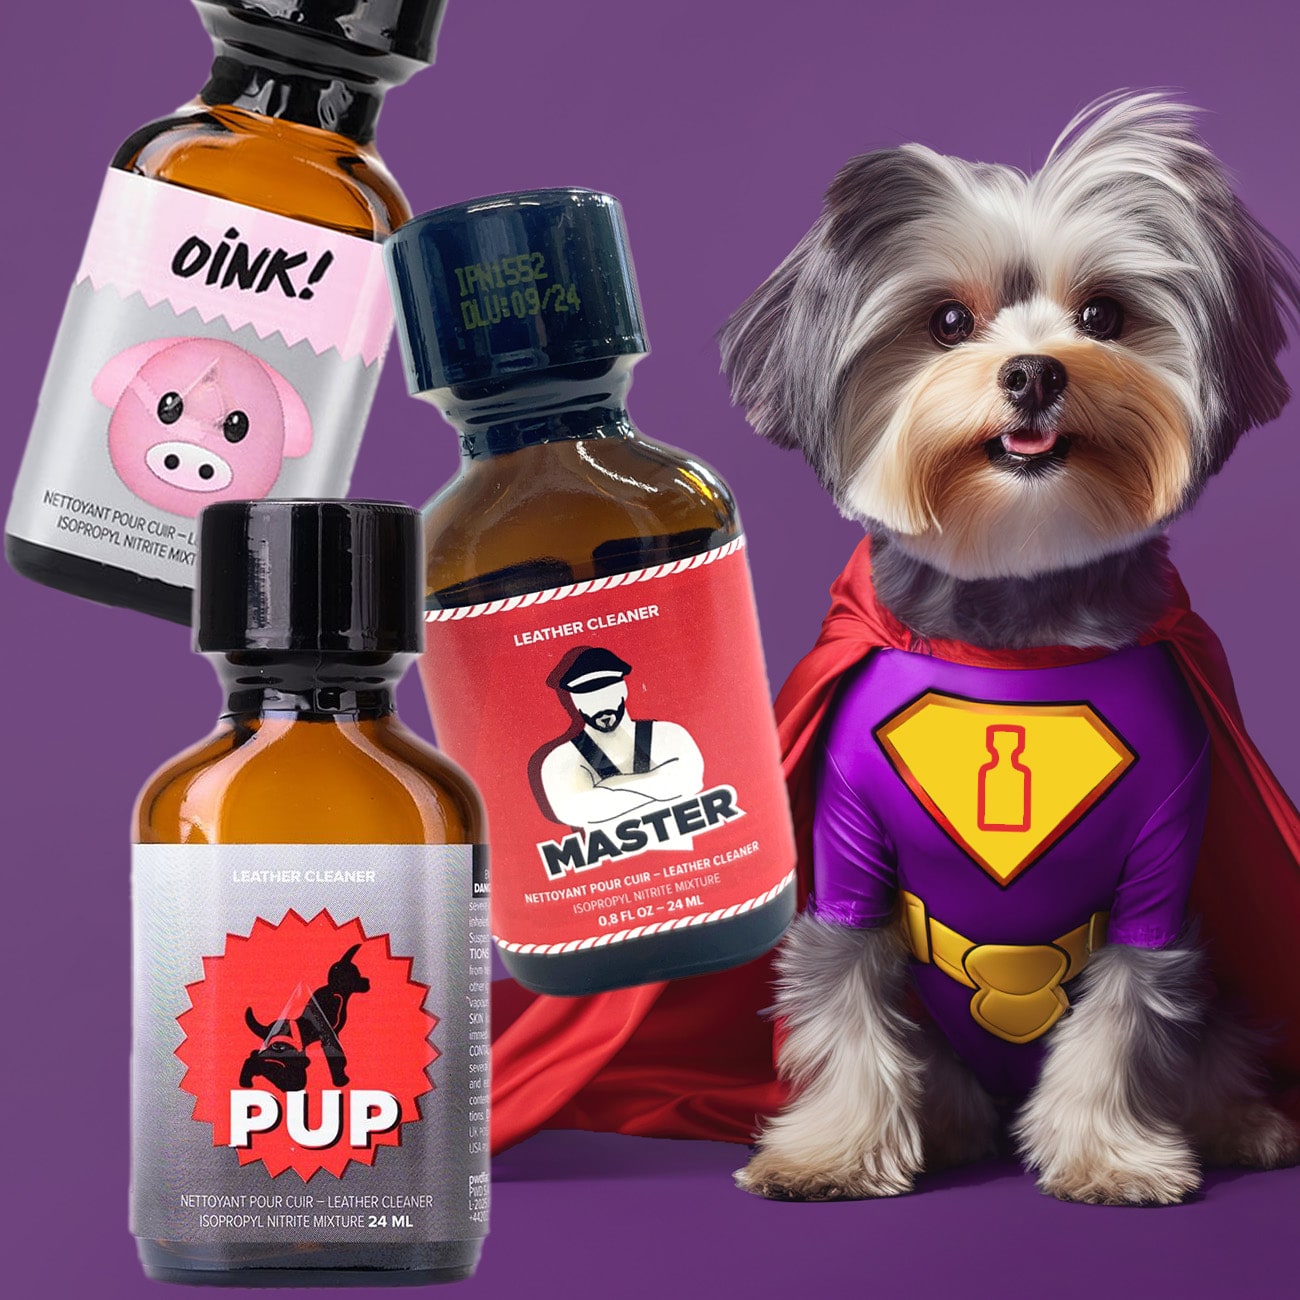 A heroic-looking dog dressed in a superhero costume poses confidently alongside a pack of playful, masterpup pack personal care products.